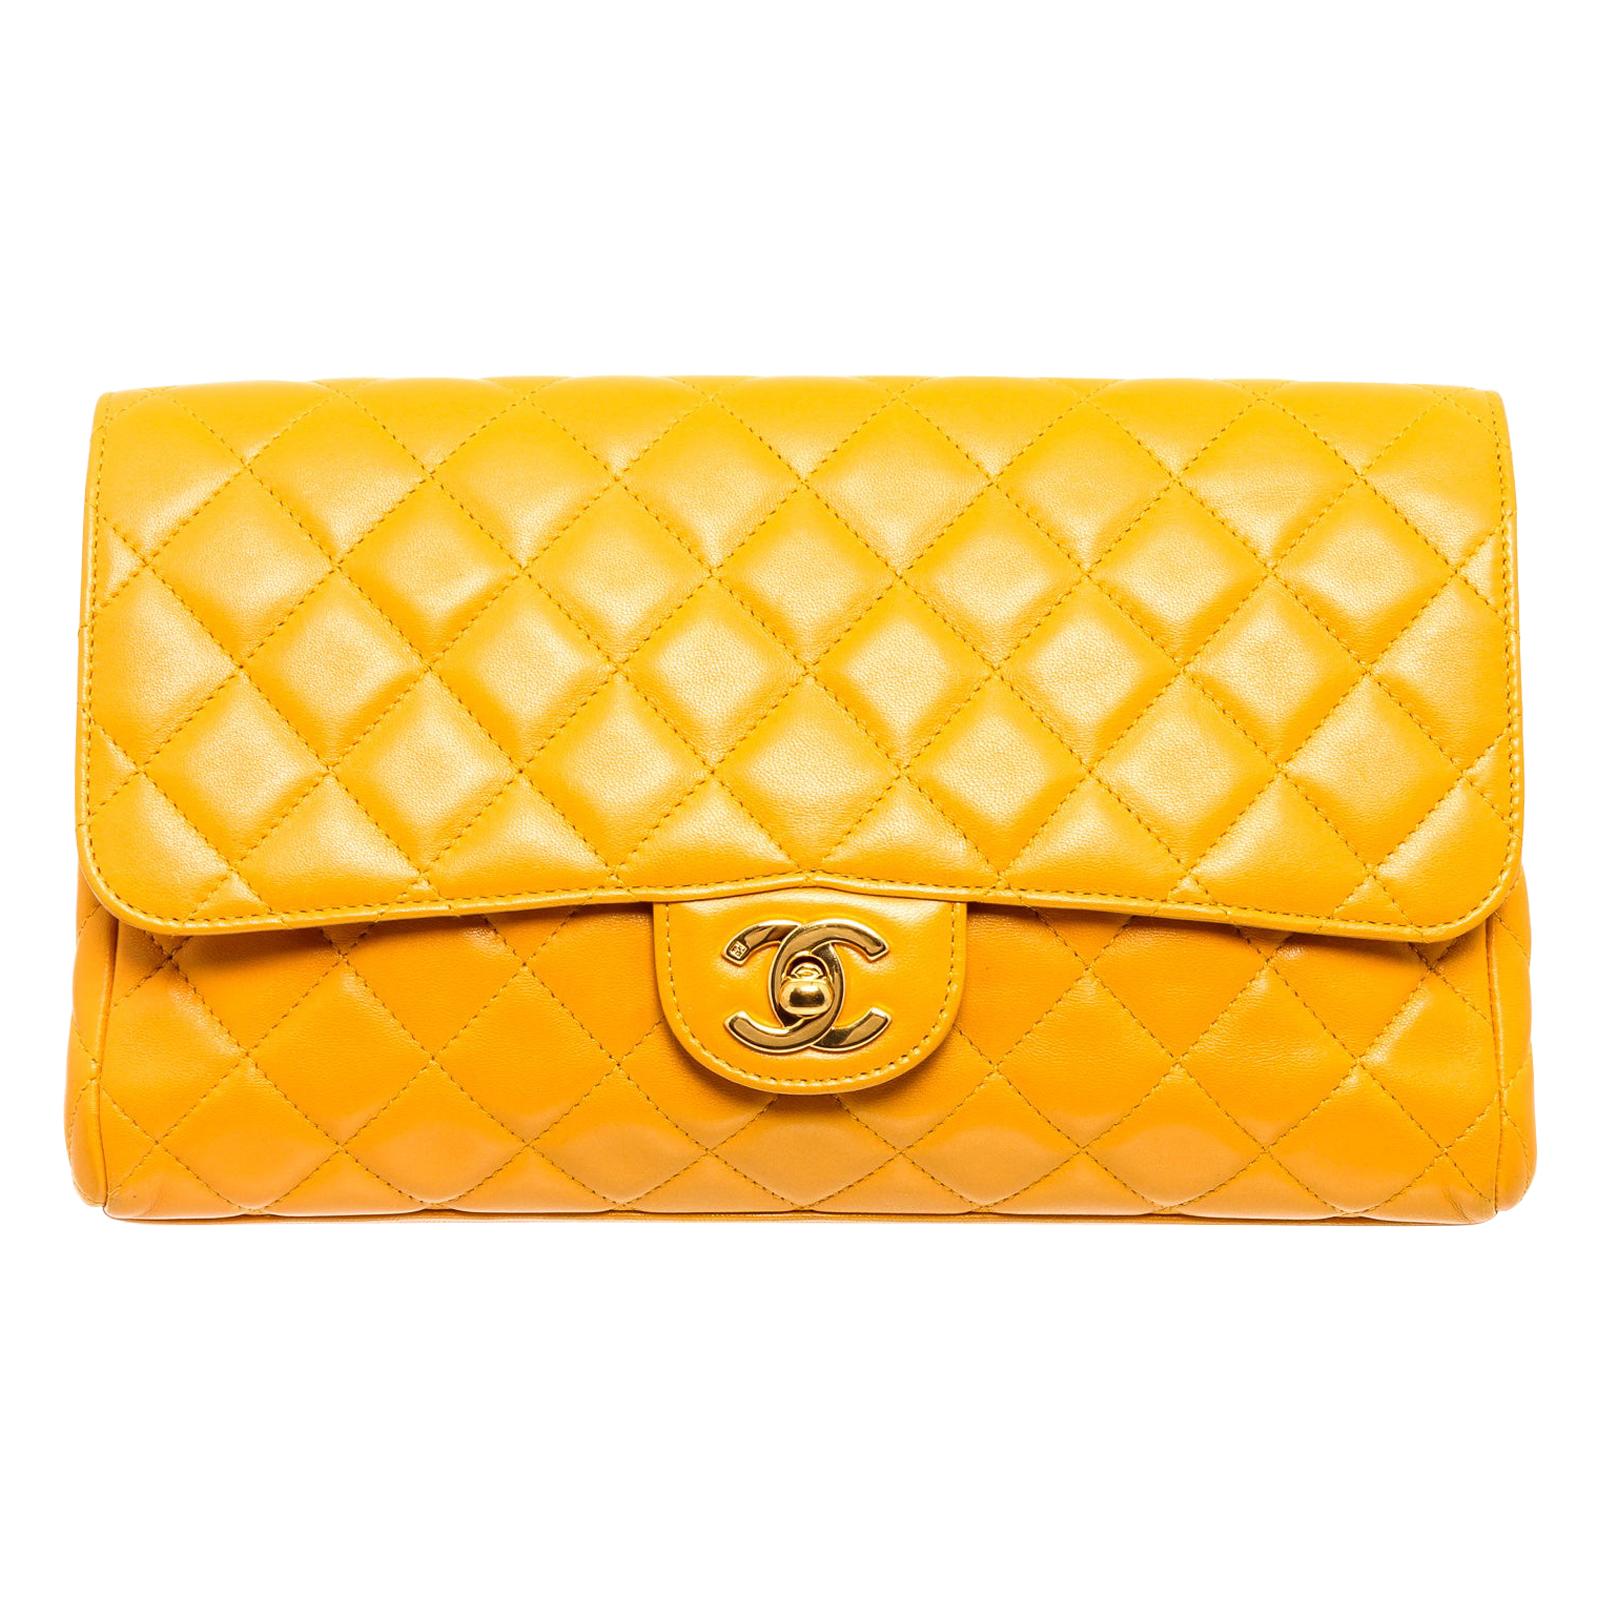 Chanel Yellow Quilted Leather Flap Clutch Bag